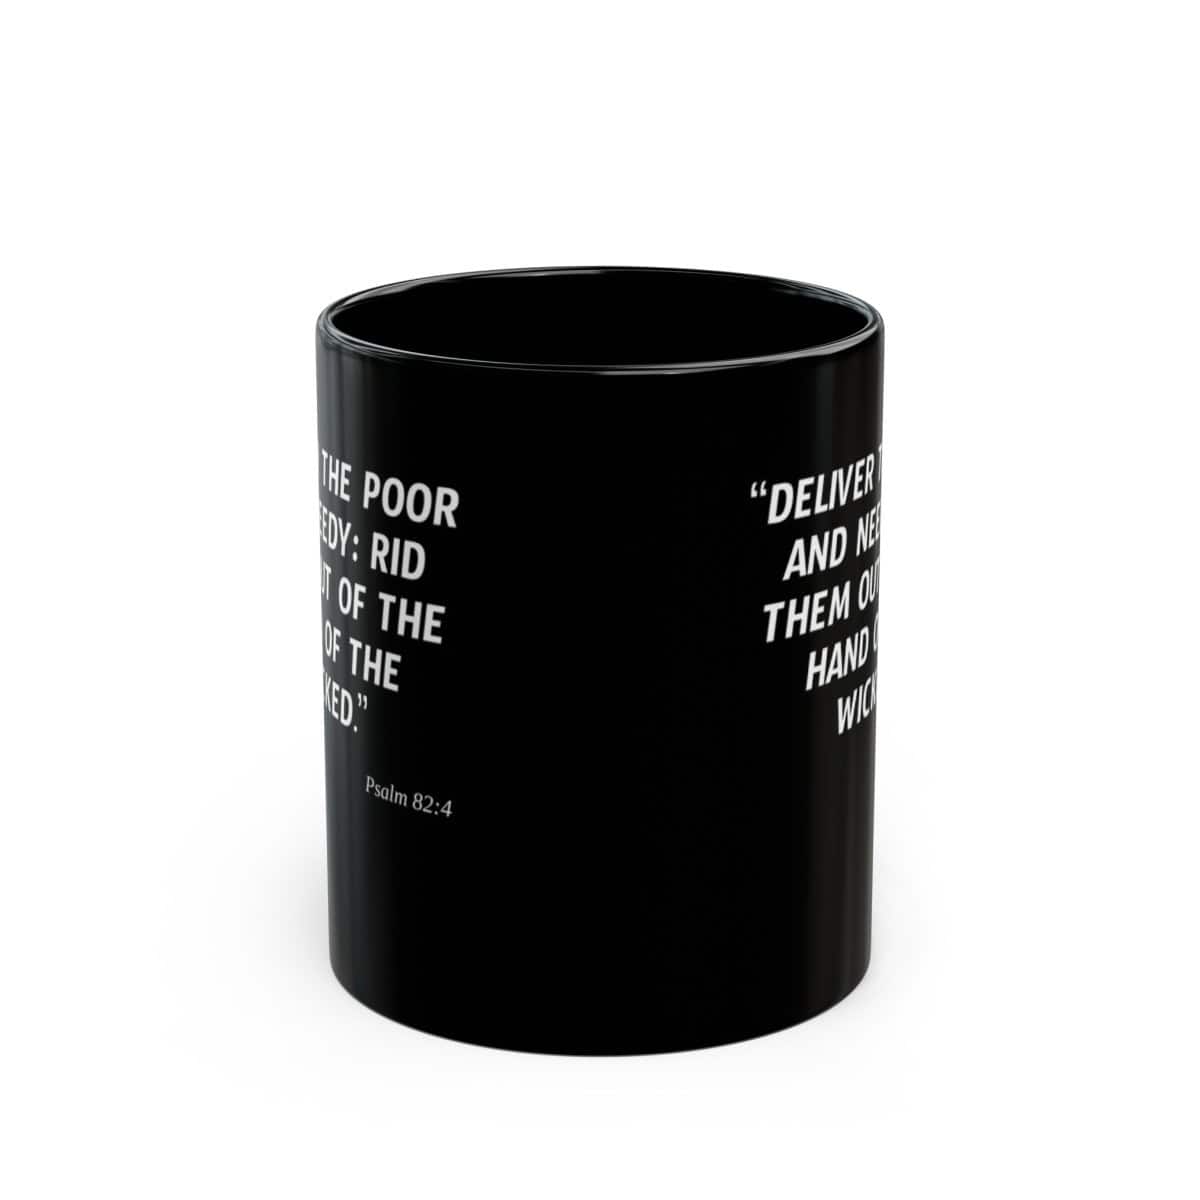 view of mug from different angles